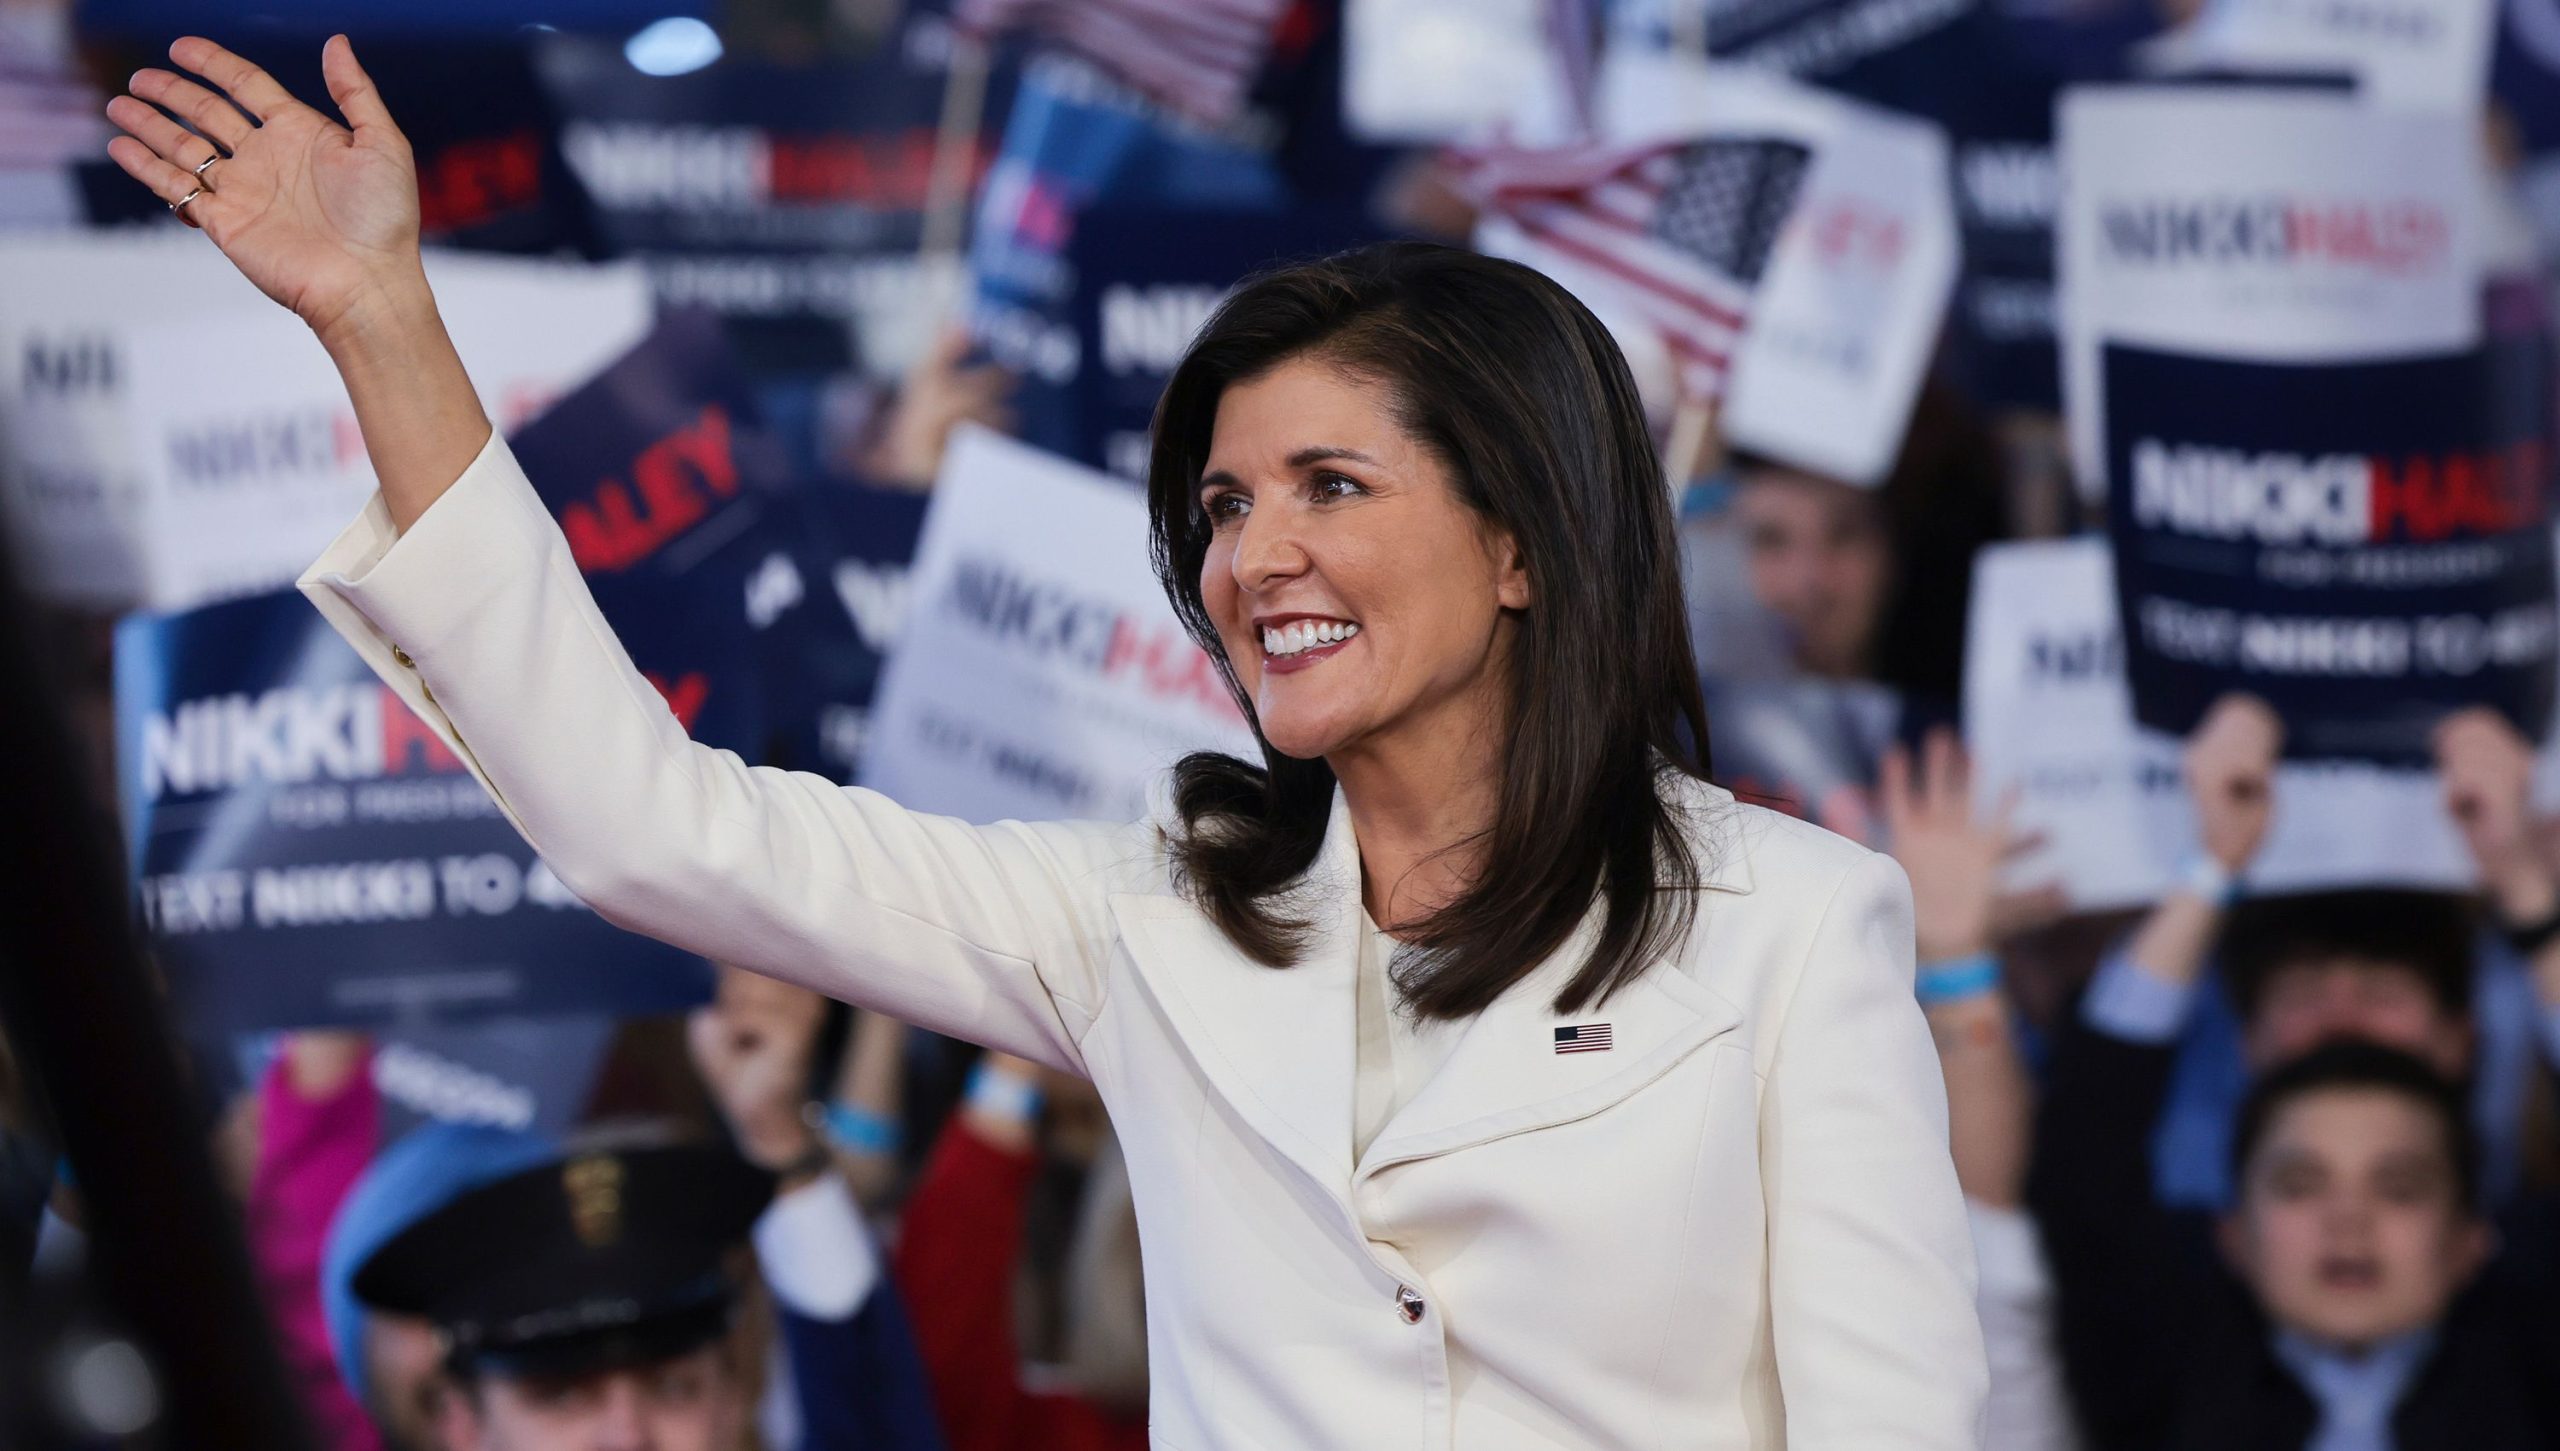 Nikki Haley: A Political Journey and Personal Insights